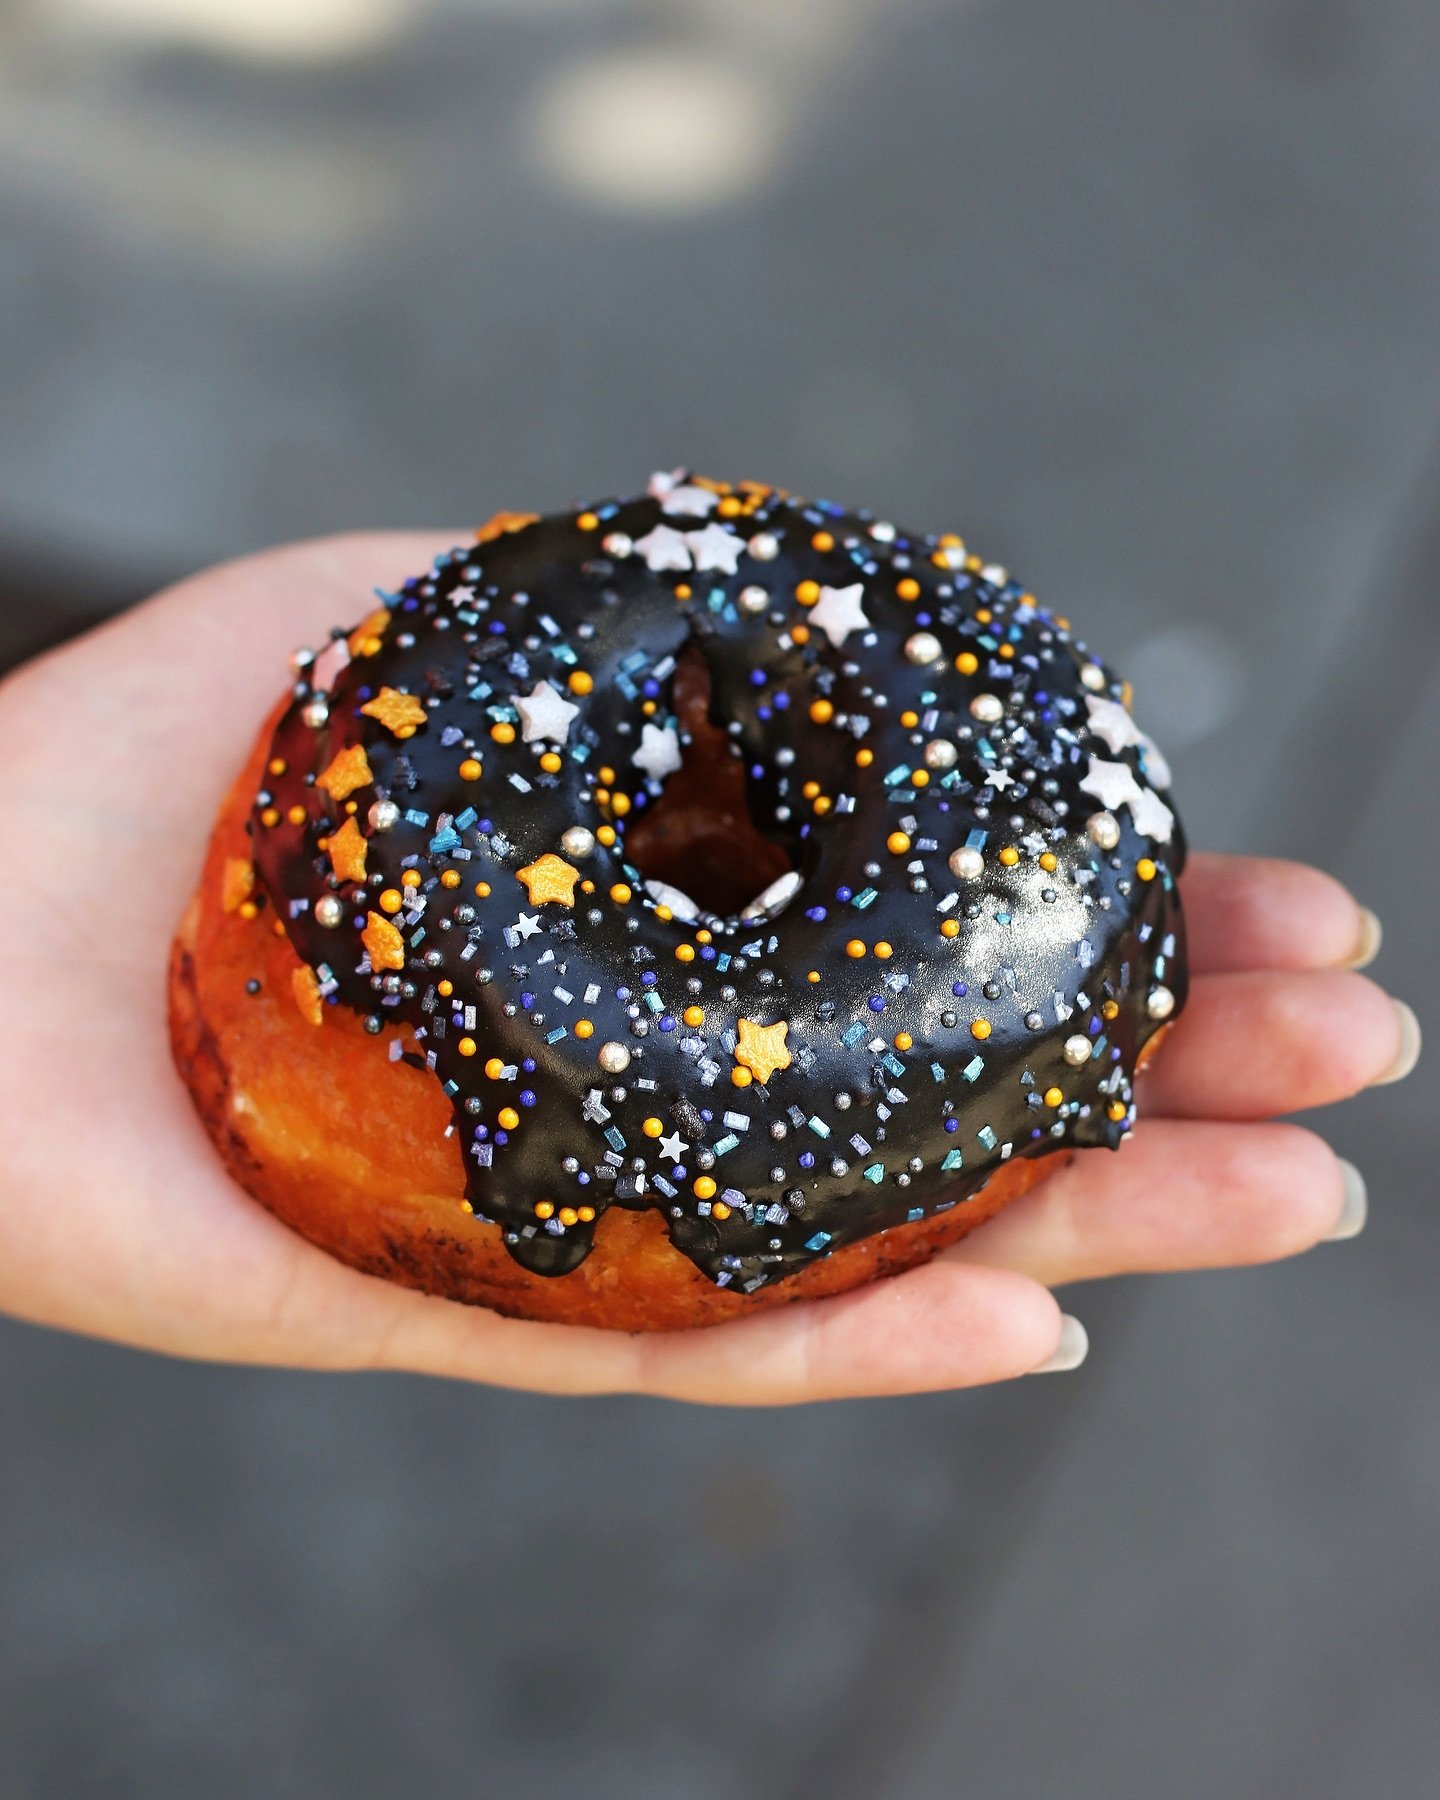 May the Fourth be with you ✨

Today we&rsquo;re offering some galaxy inspired donuts in honor of May the 4th.

💫Dark chocolate chips folded into a coffee dough. Dipped in a midnight black chocolate glaze and garnished with galaxy sprinkles.